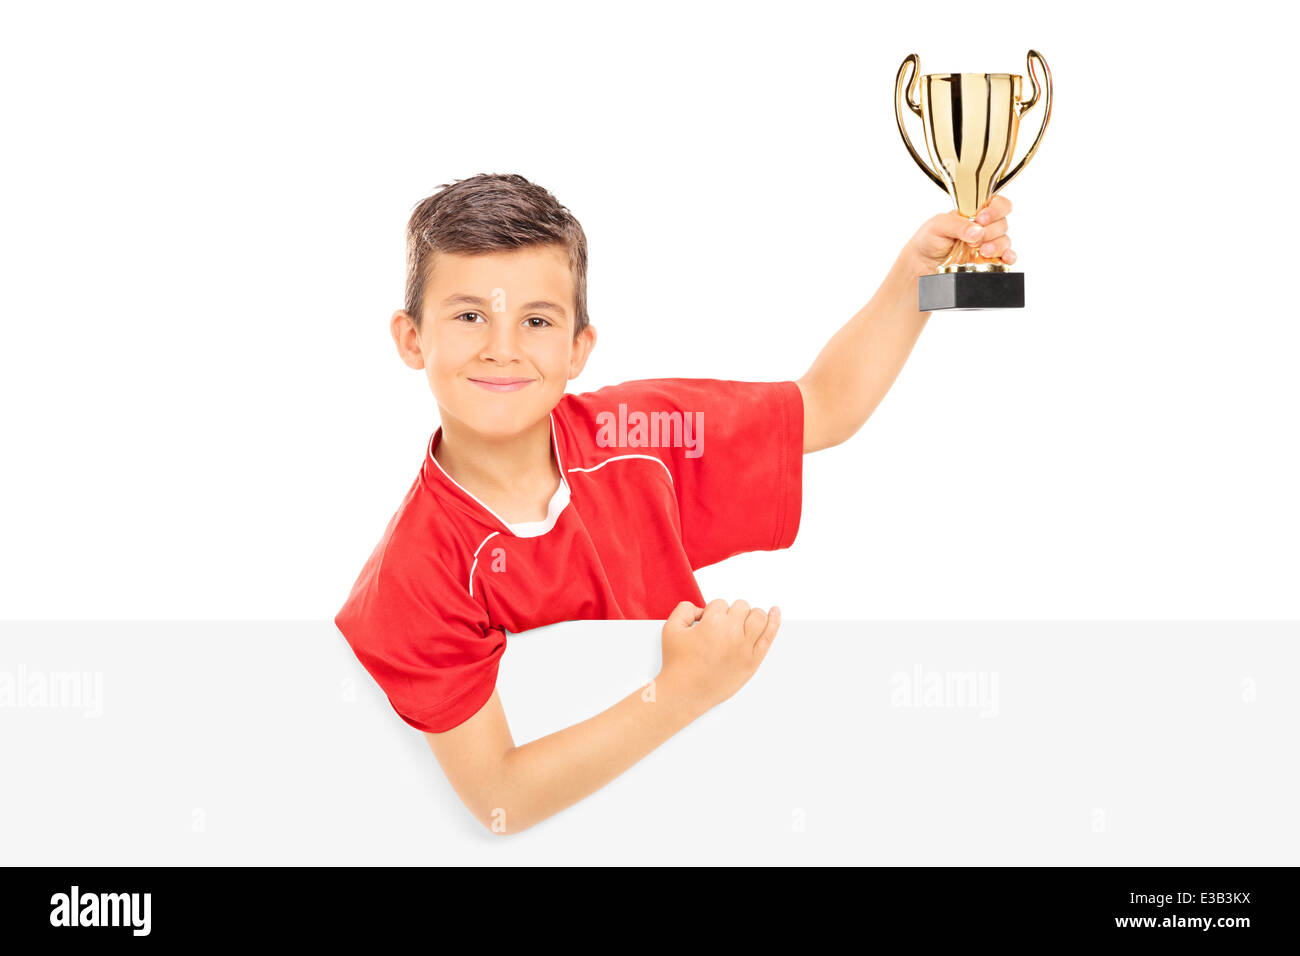 Billboard award trophy Cut Out Stock Images & Pictures - Alamy